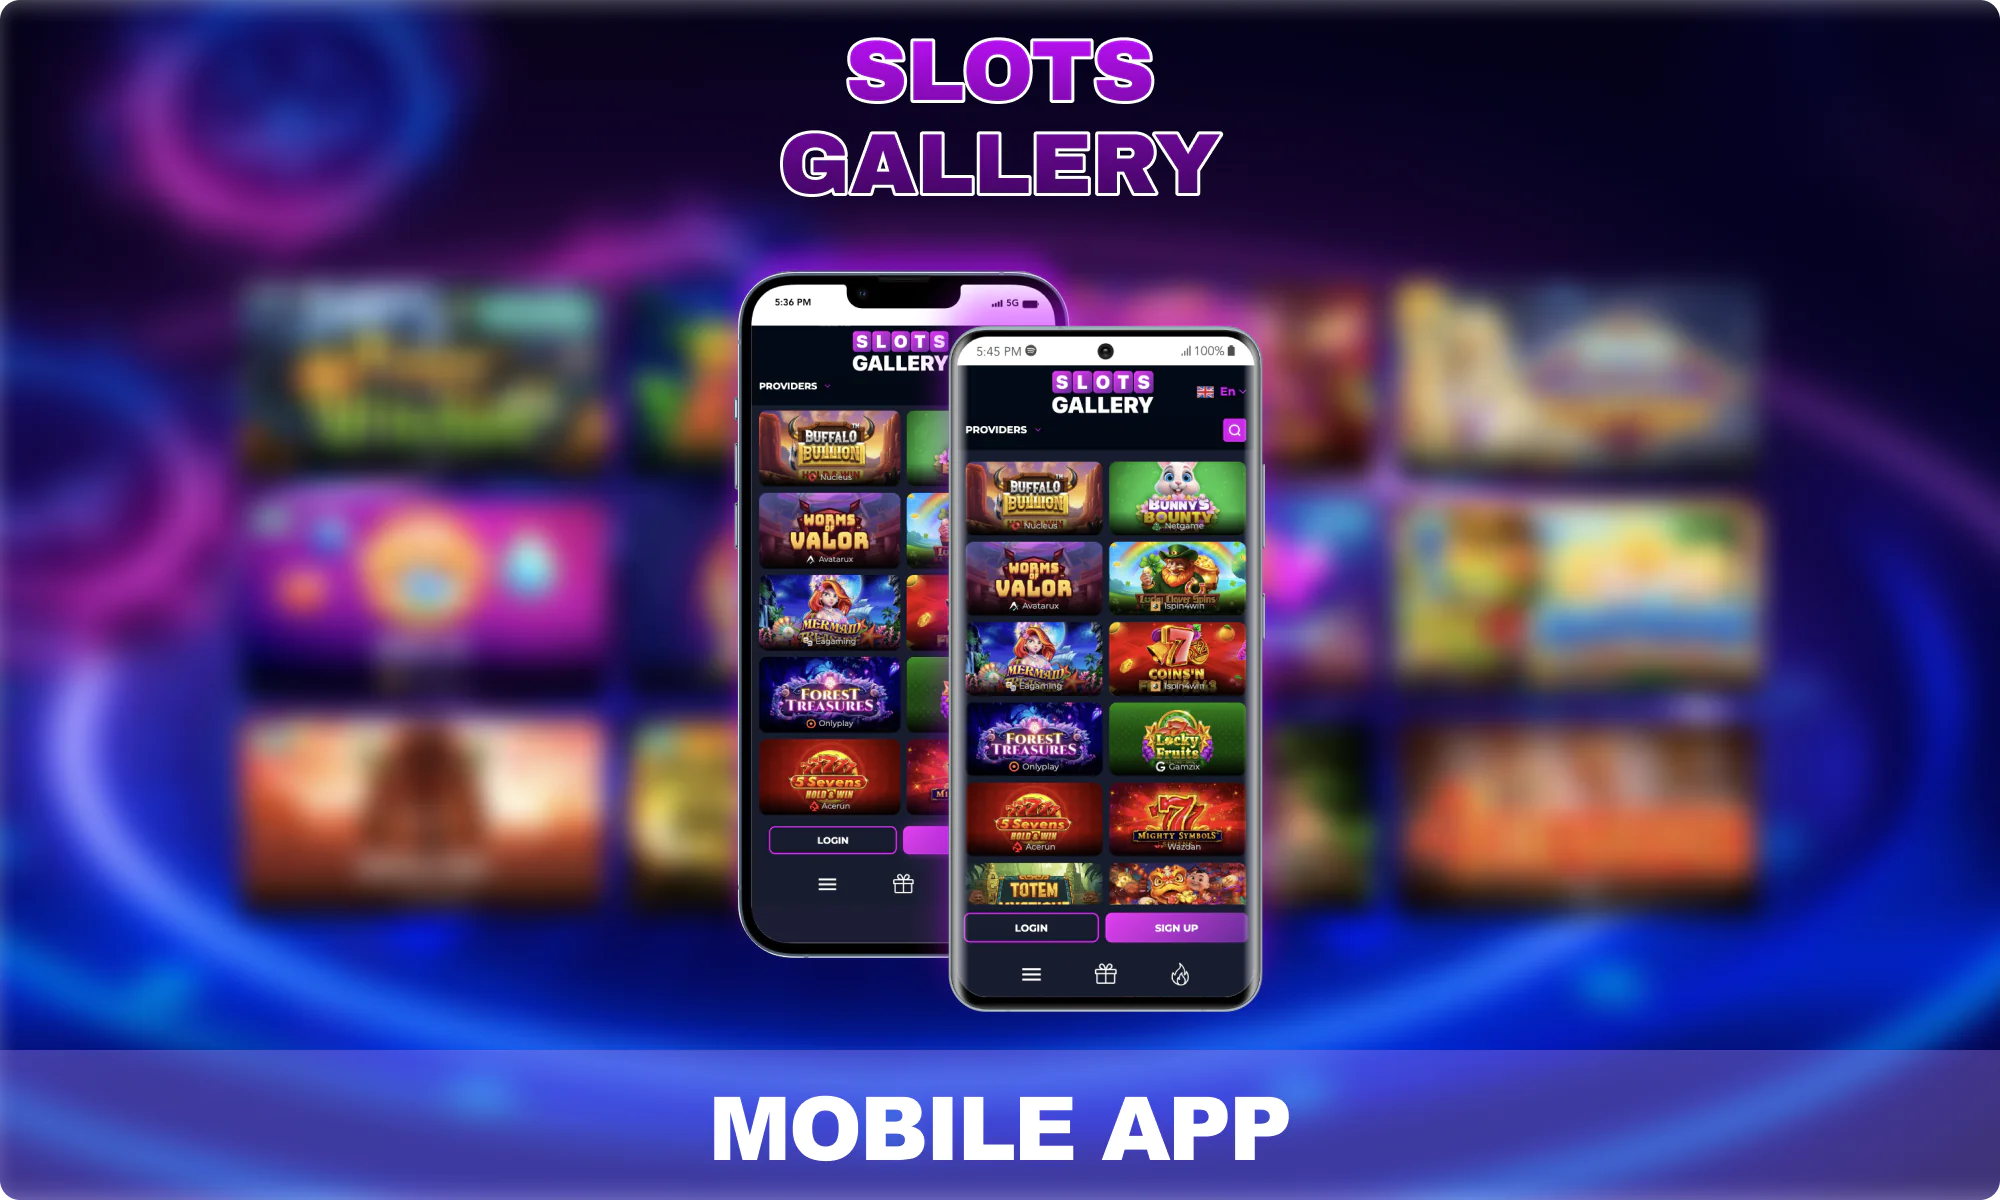 Slots Gallery Casino mobile app for iOS and Android